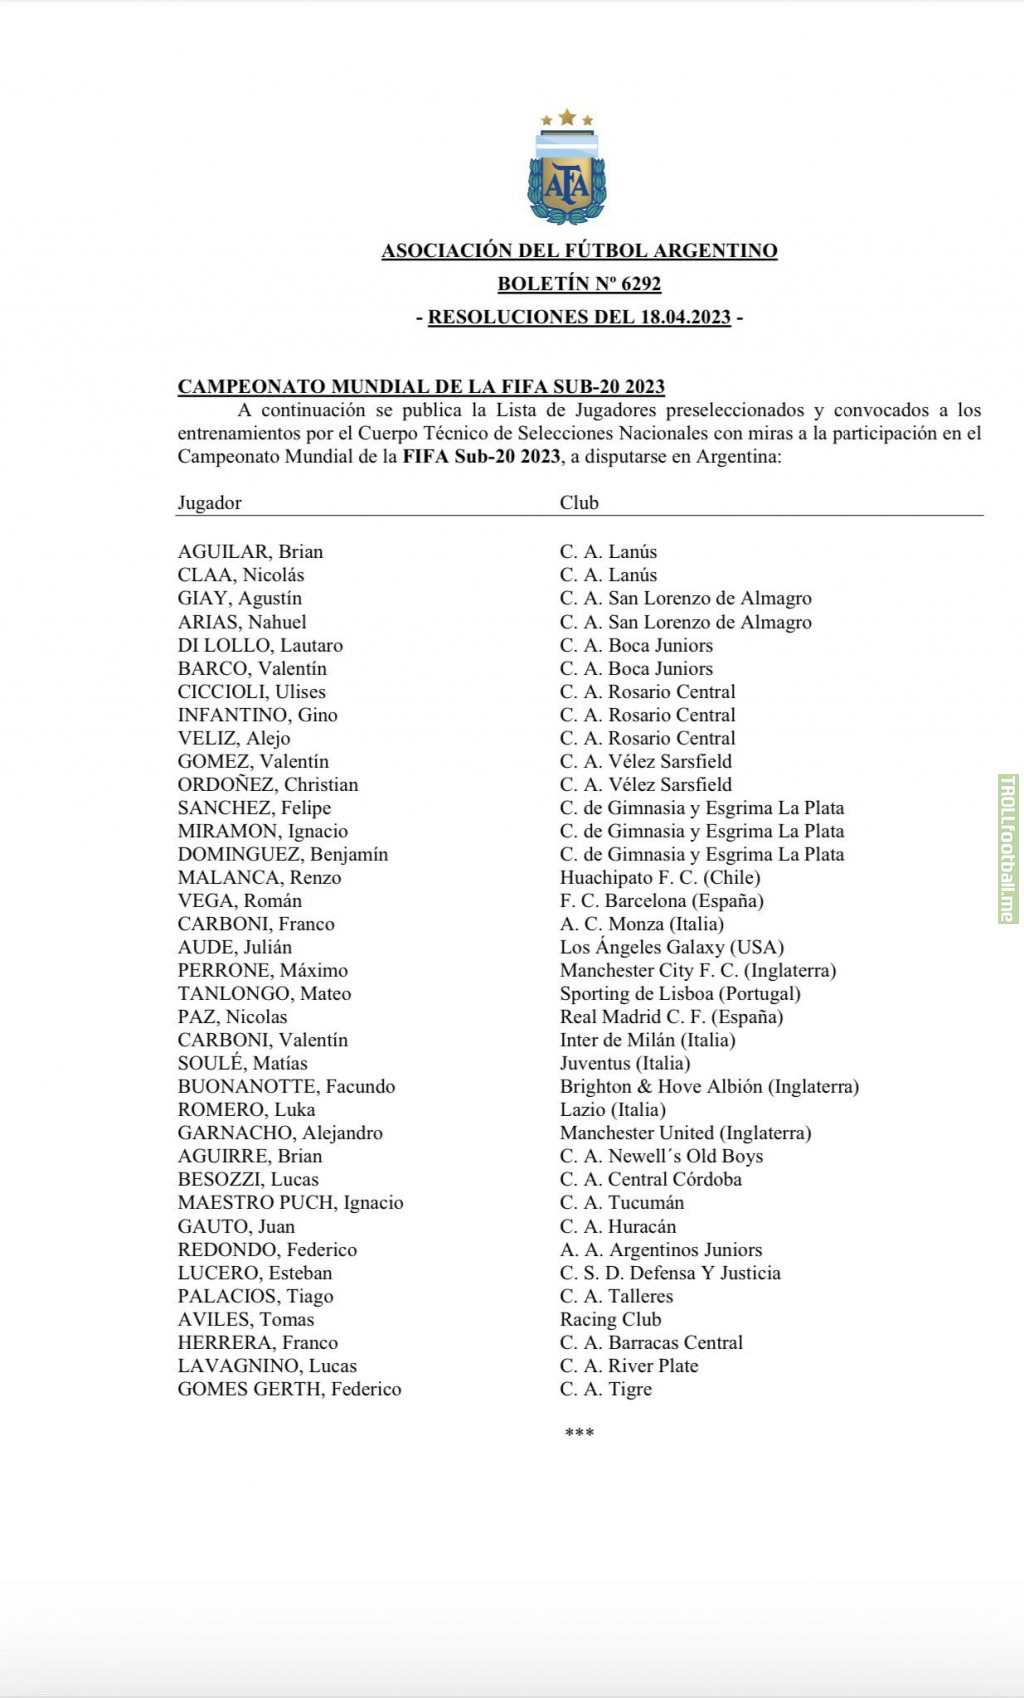 [AFA] Argentina's preliminary list for the FIFA U-20 World Cup.